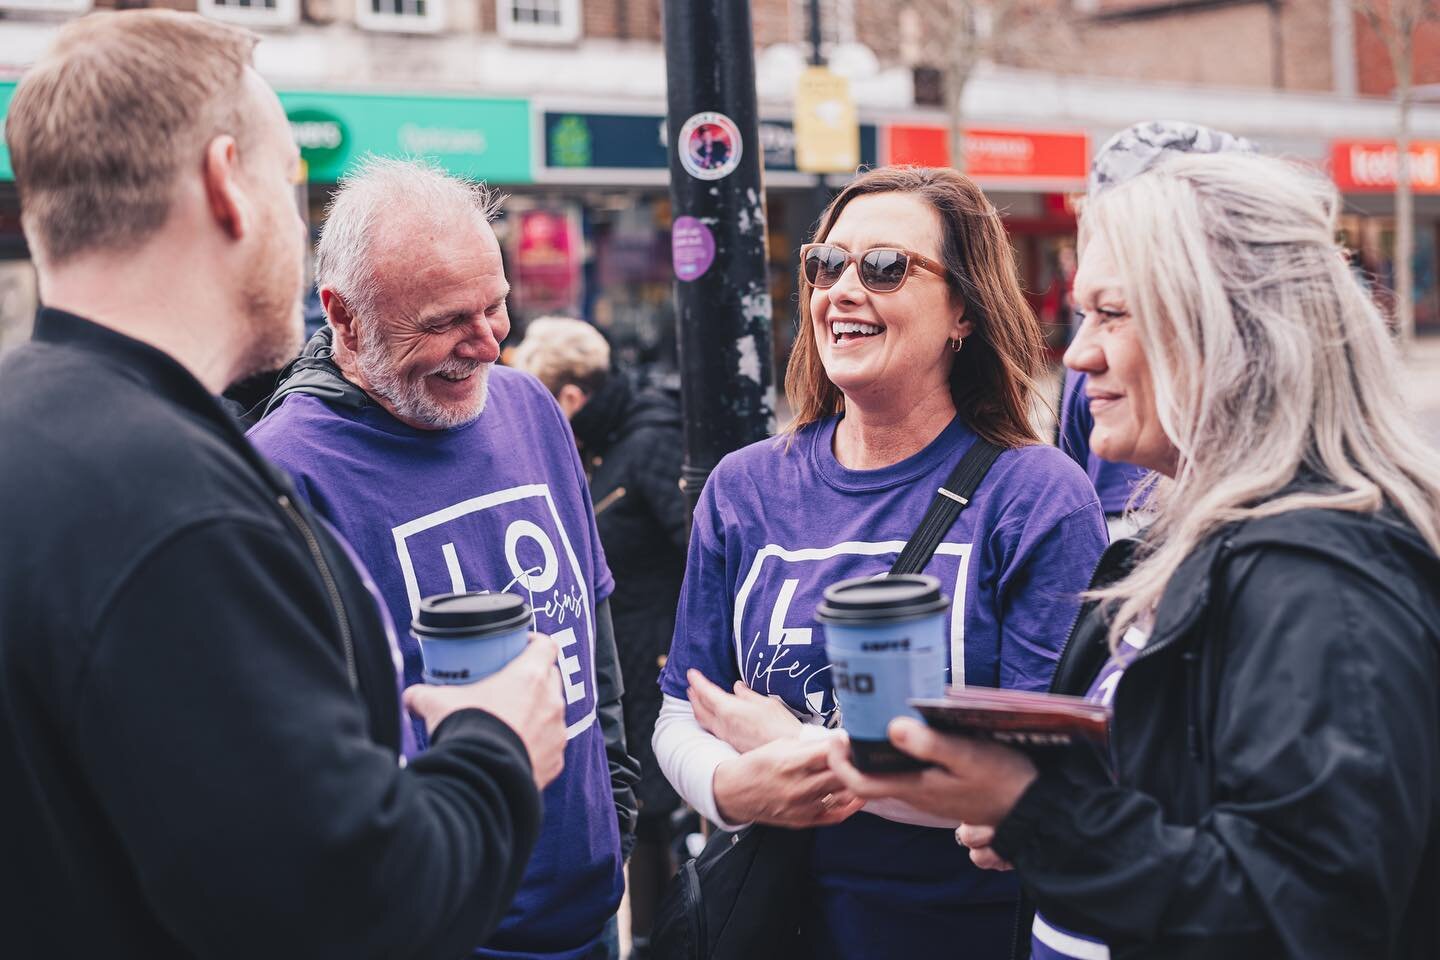 We had a great time out on the high street yesterday for our outreach 🐣🙌

We gave away 1200 creme eggs! 

A big thank you to everyone who came out and joined us, and please be praying that fruit will come from the invites we gave out and conversati